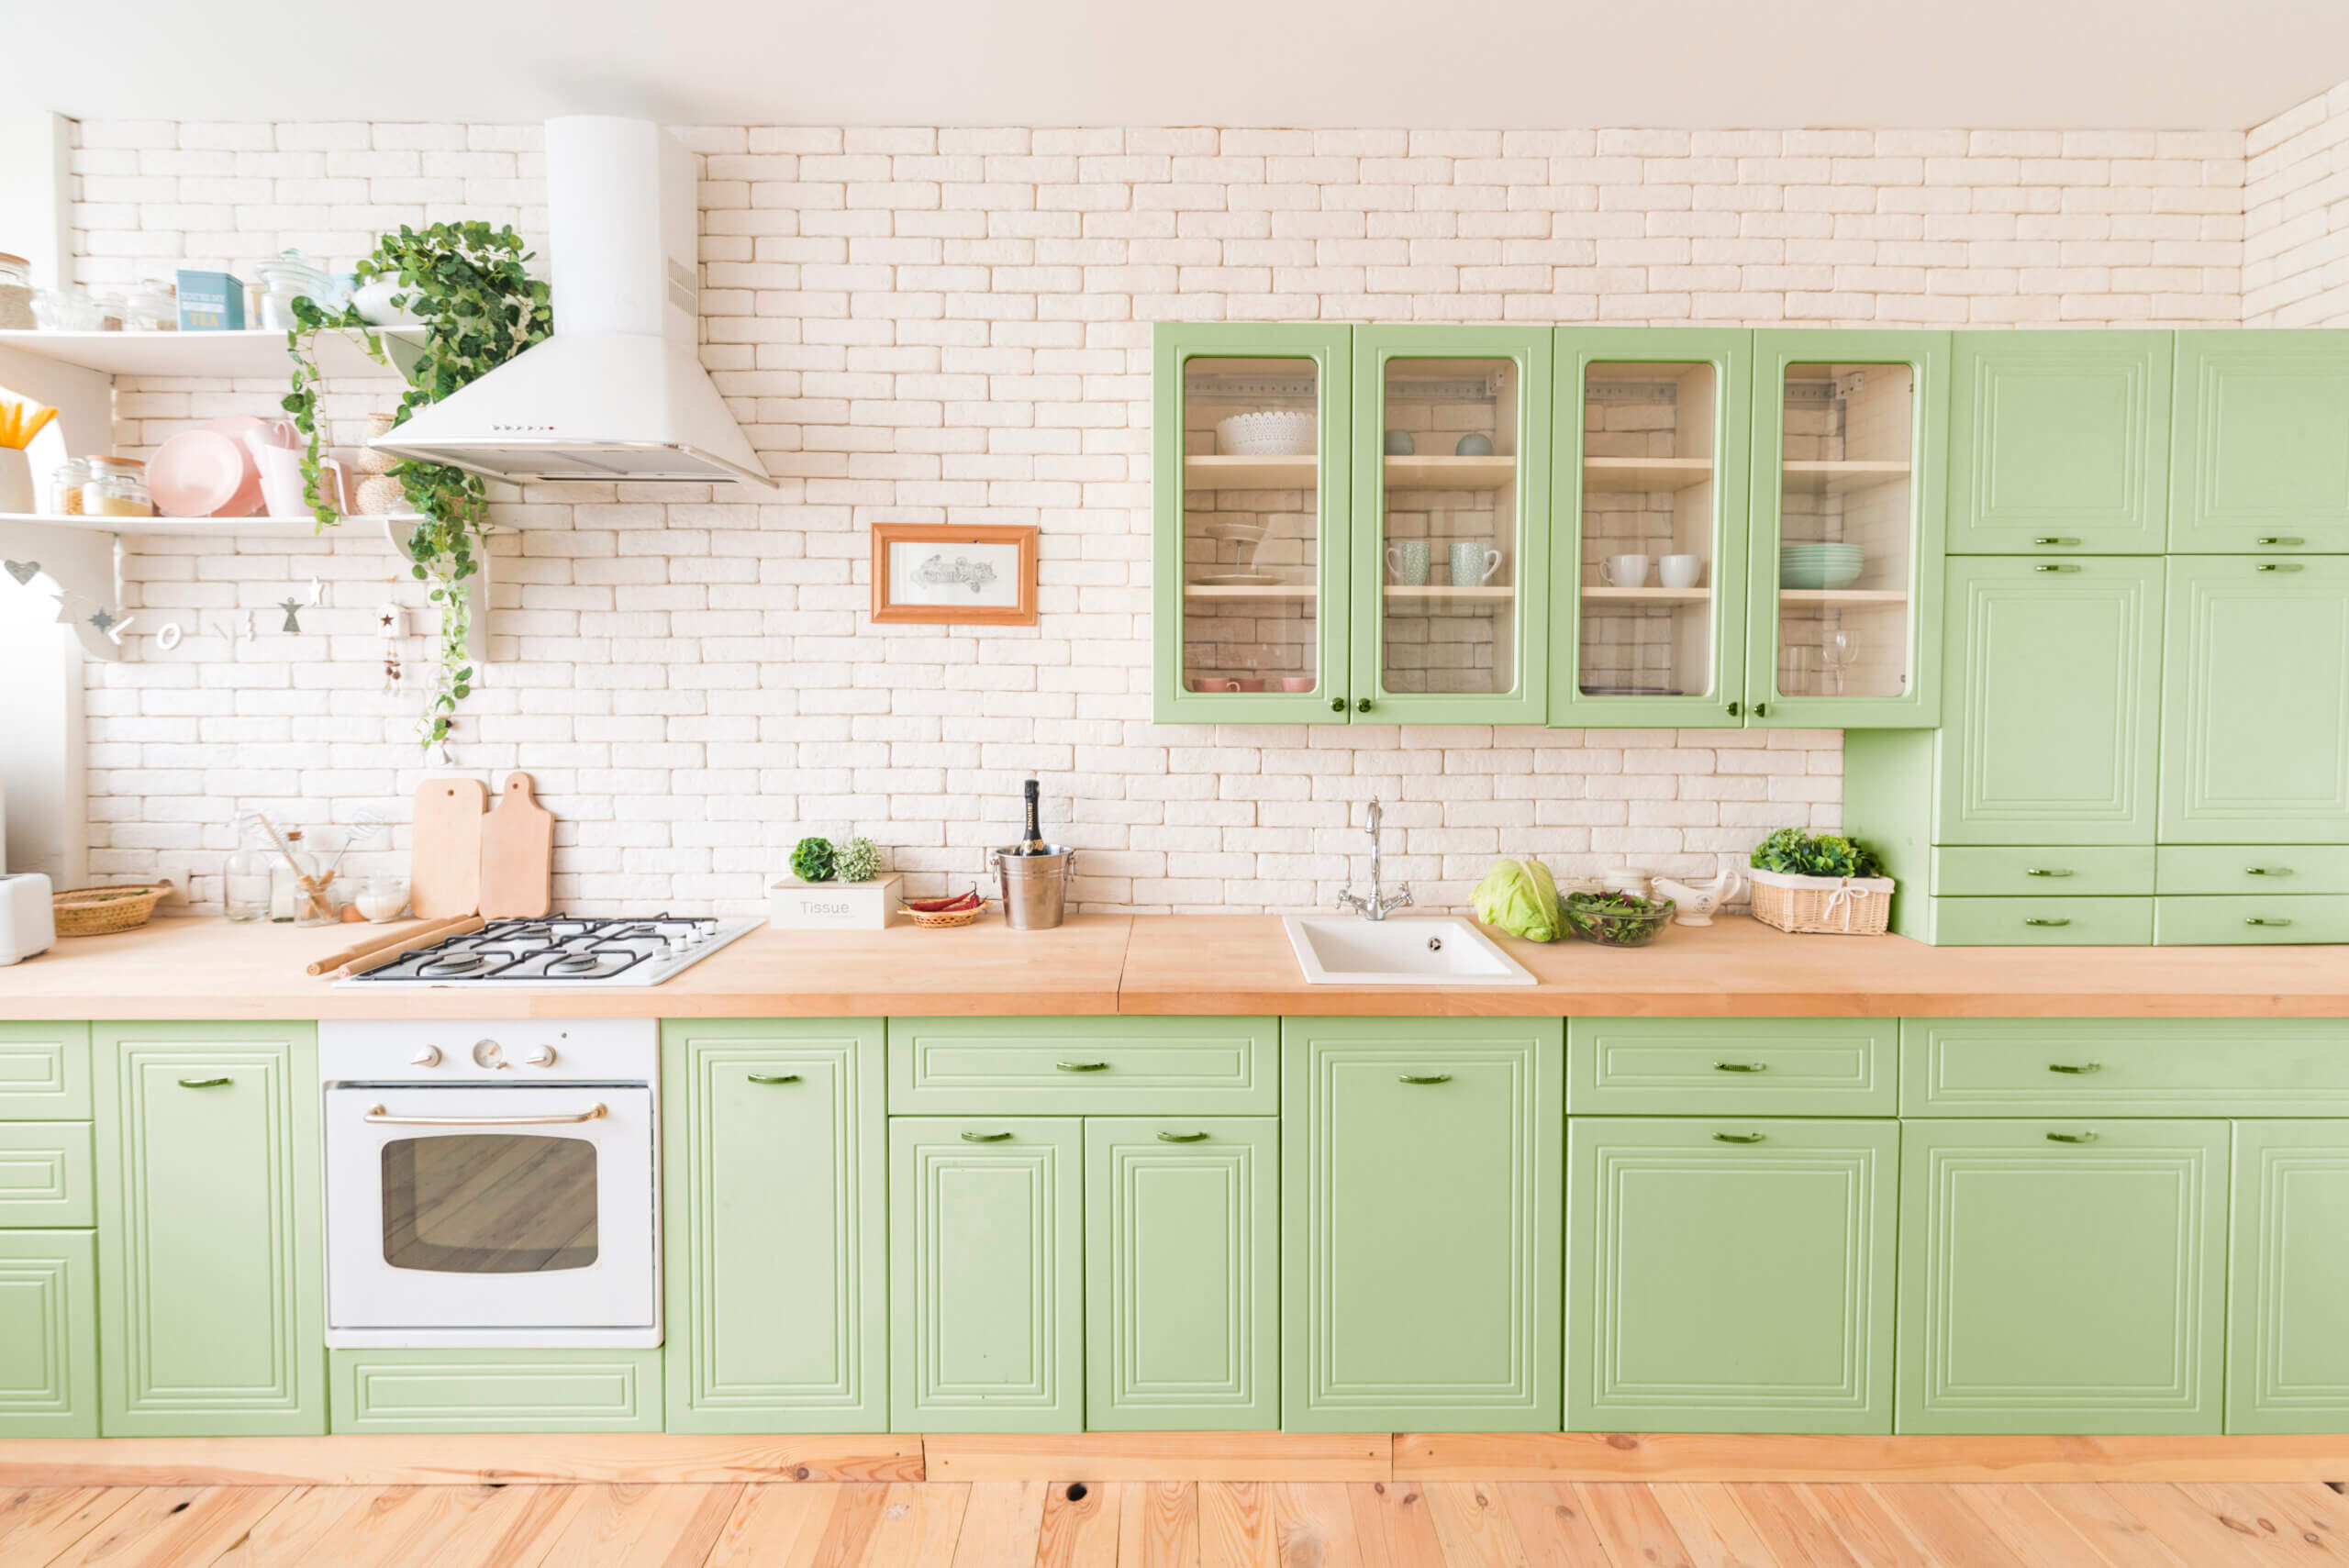 Bright kitchen with green cabinets and a touch of greenery